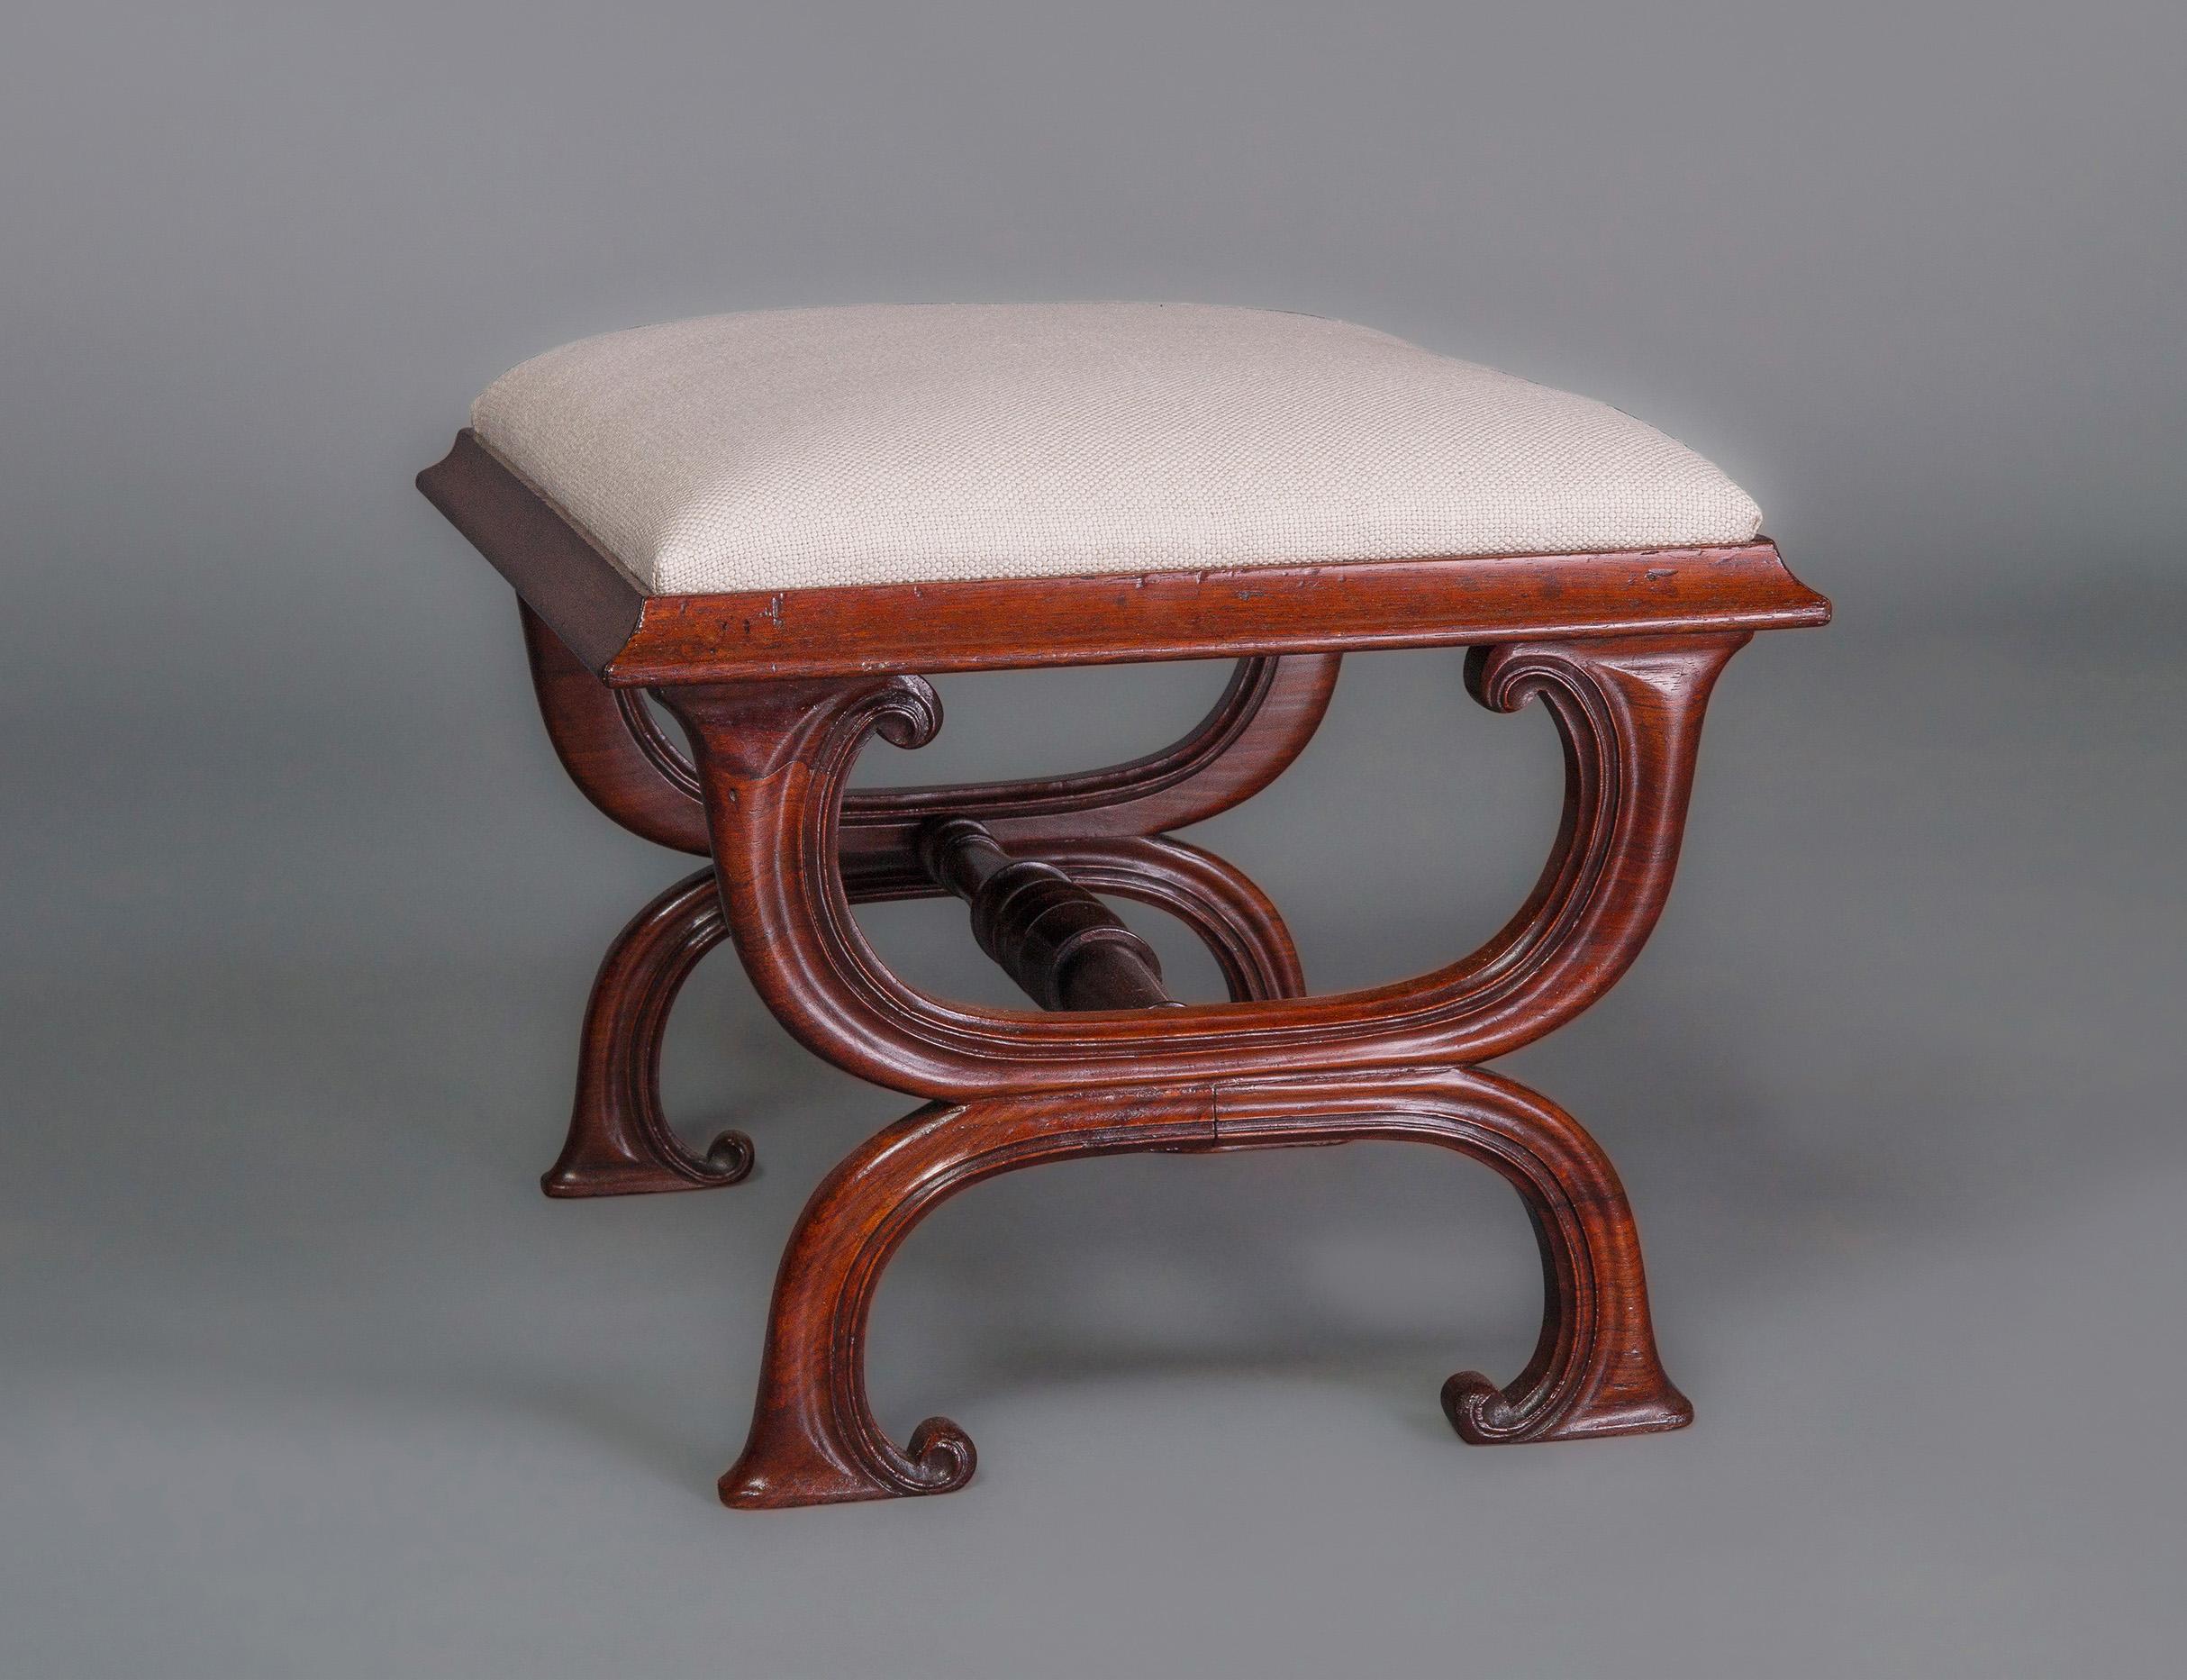 A very attractive stool in a variation of the x-frame design developed in the early Regency period by the renowned firm of Gillows of Lancaster with a well turned stretchers, carved legs and the unusual feature of inturned feet.